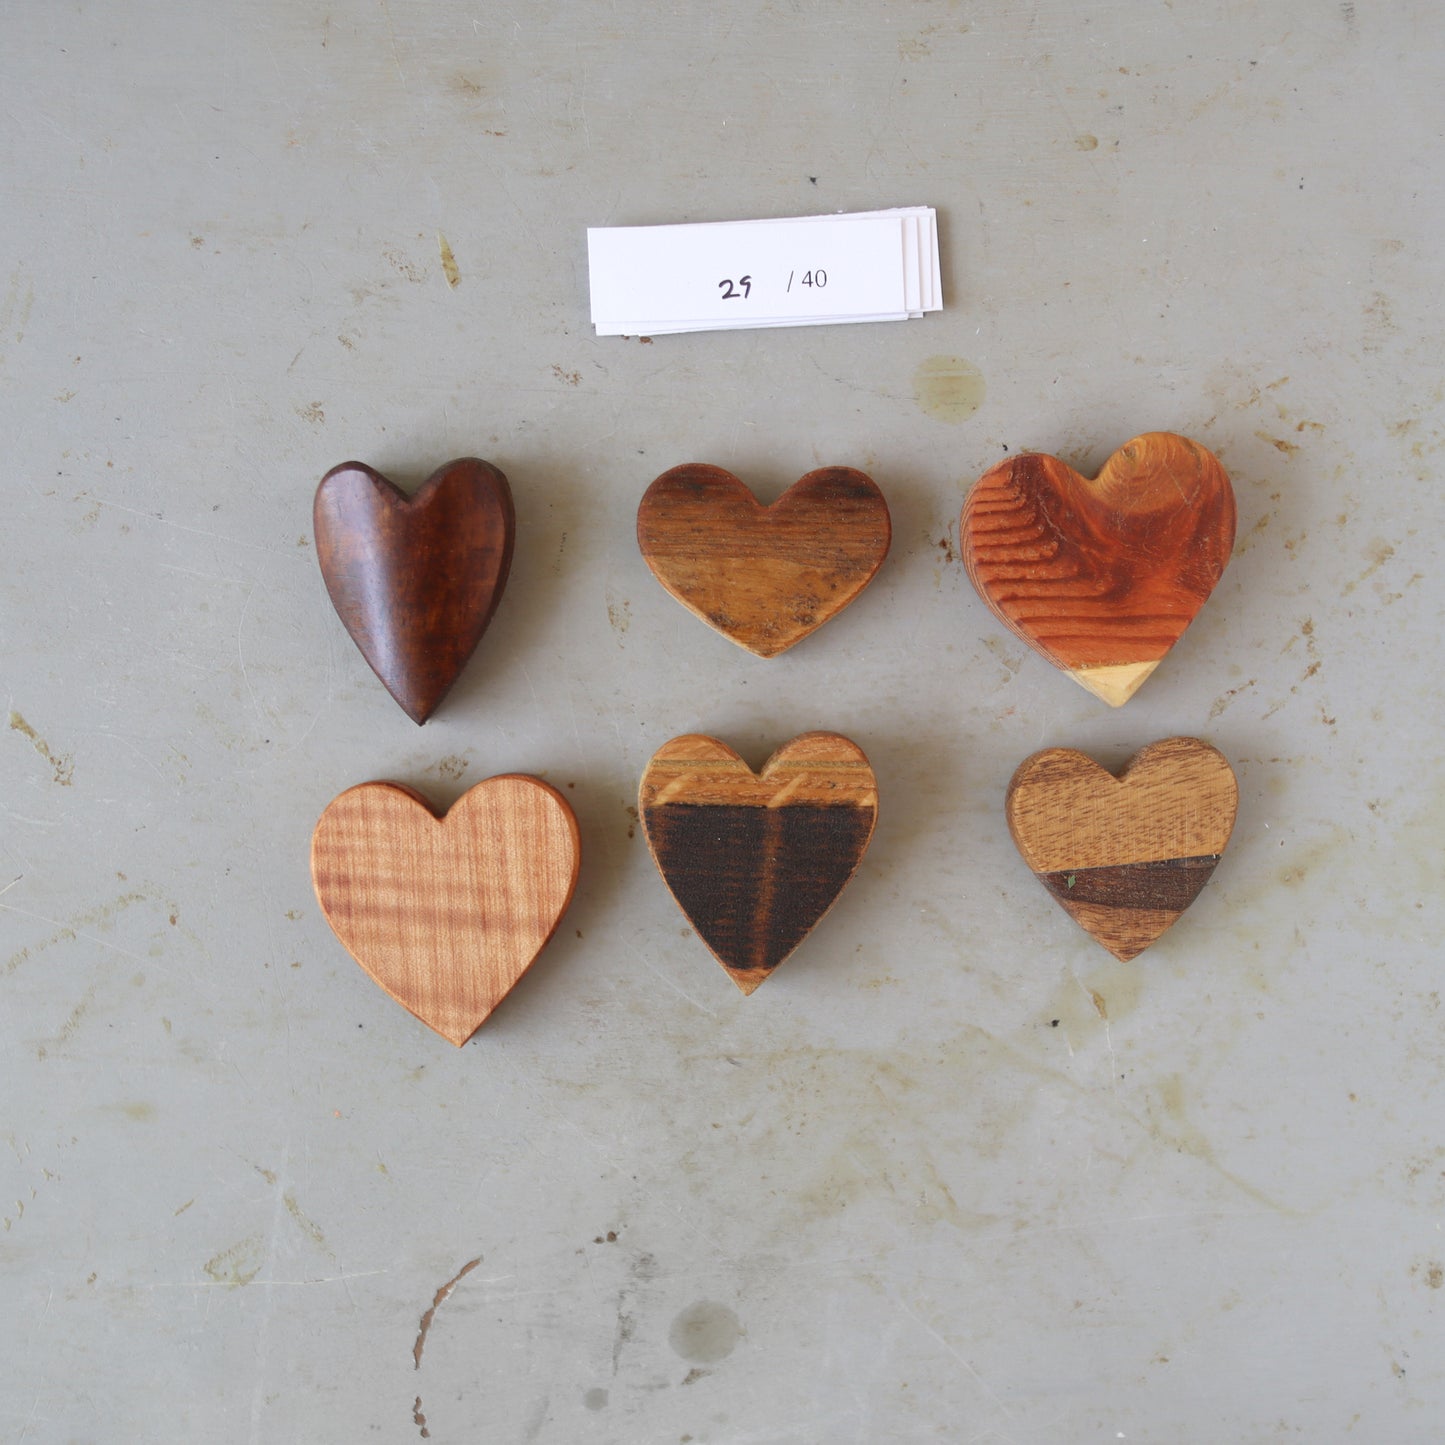 Little Heart Collection IV